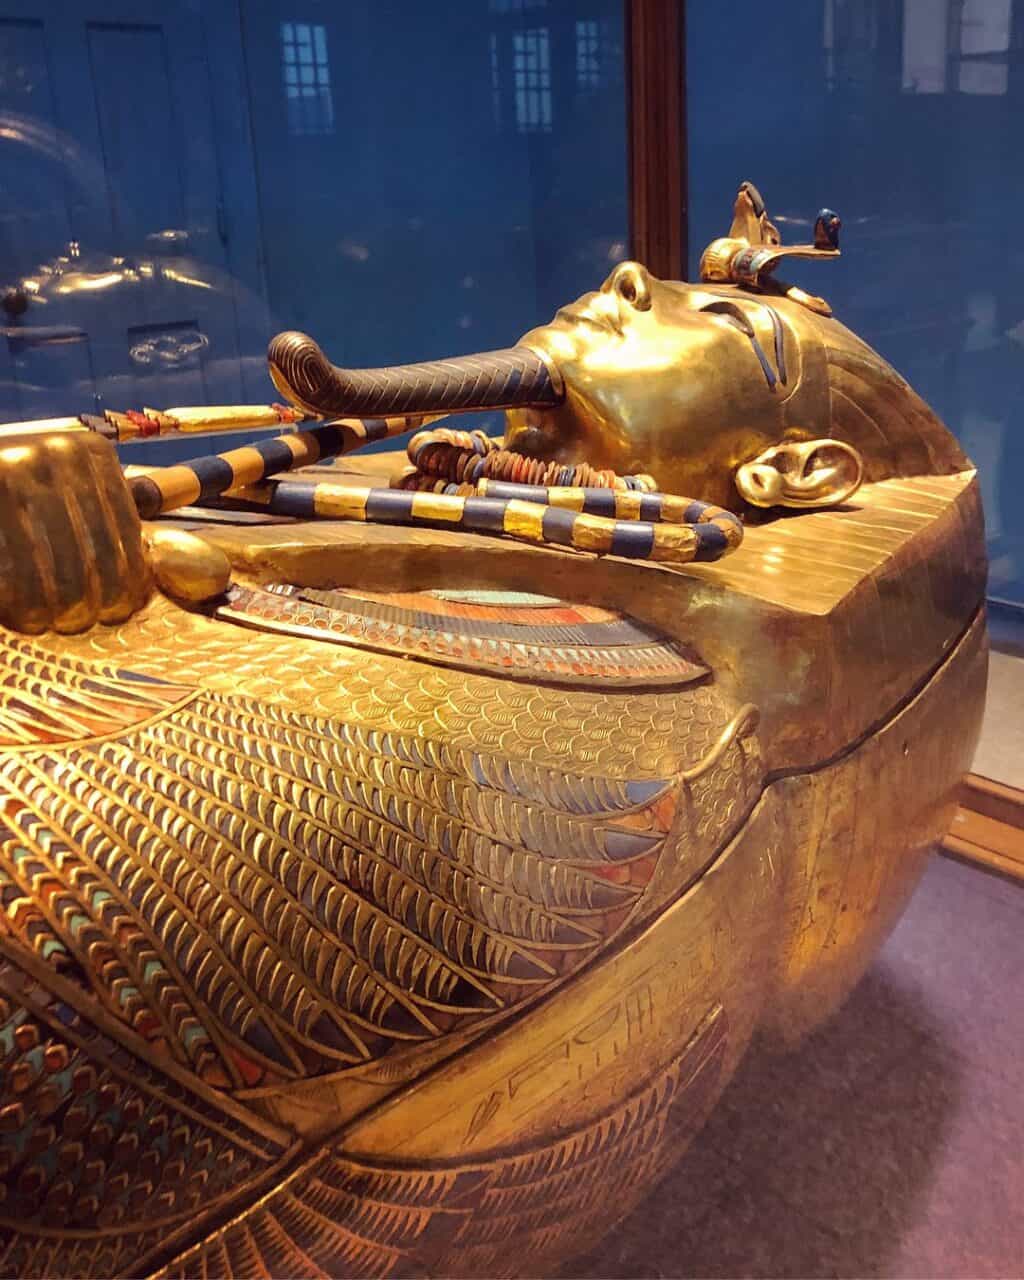 The Egyptian Museum in Cairo, Egypt